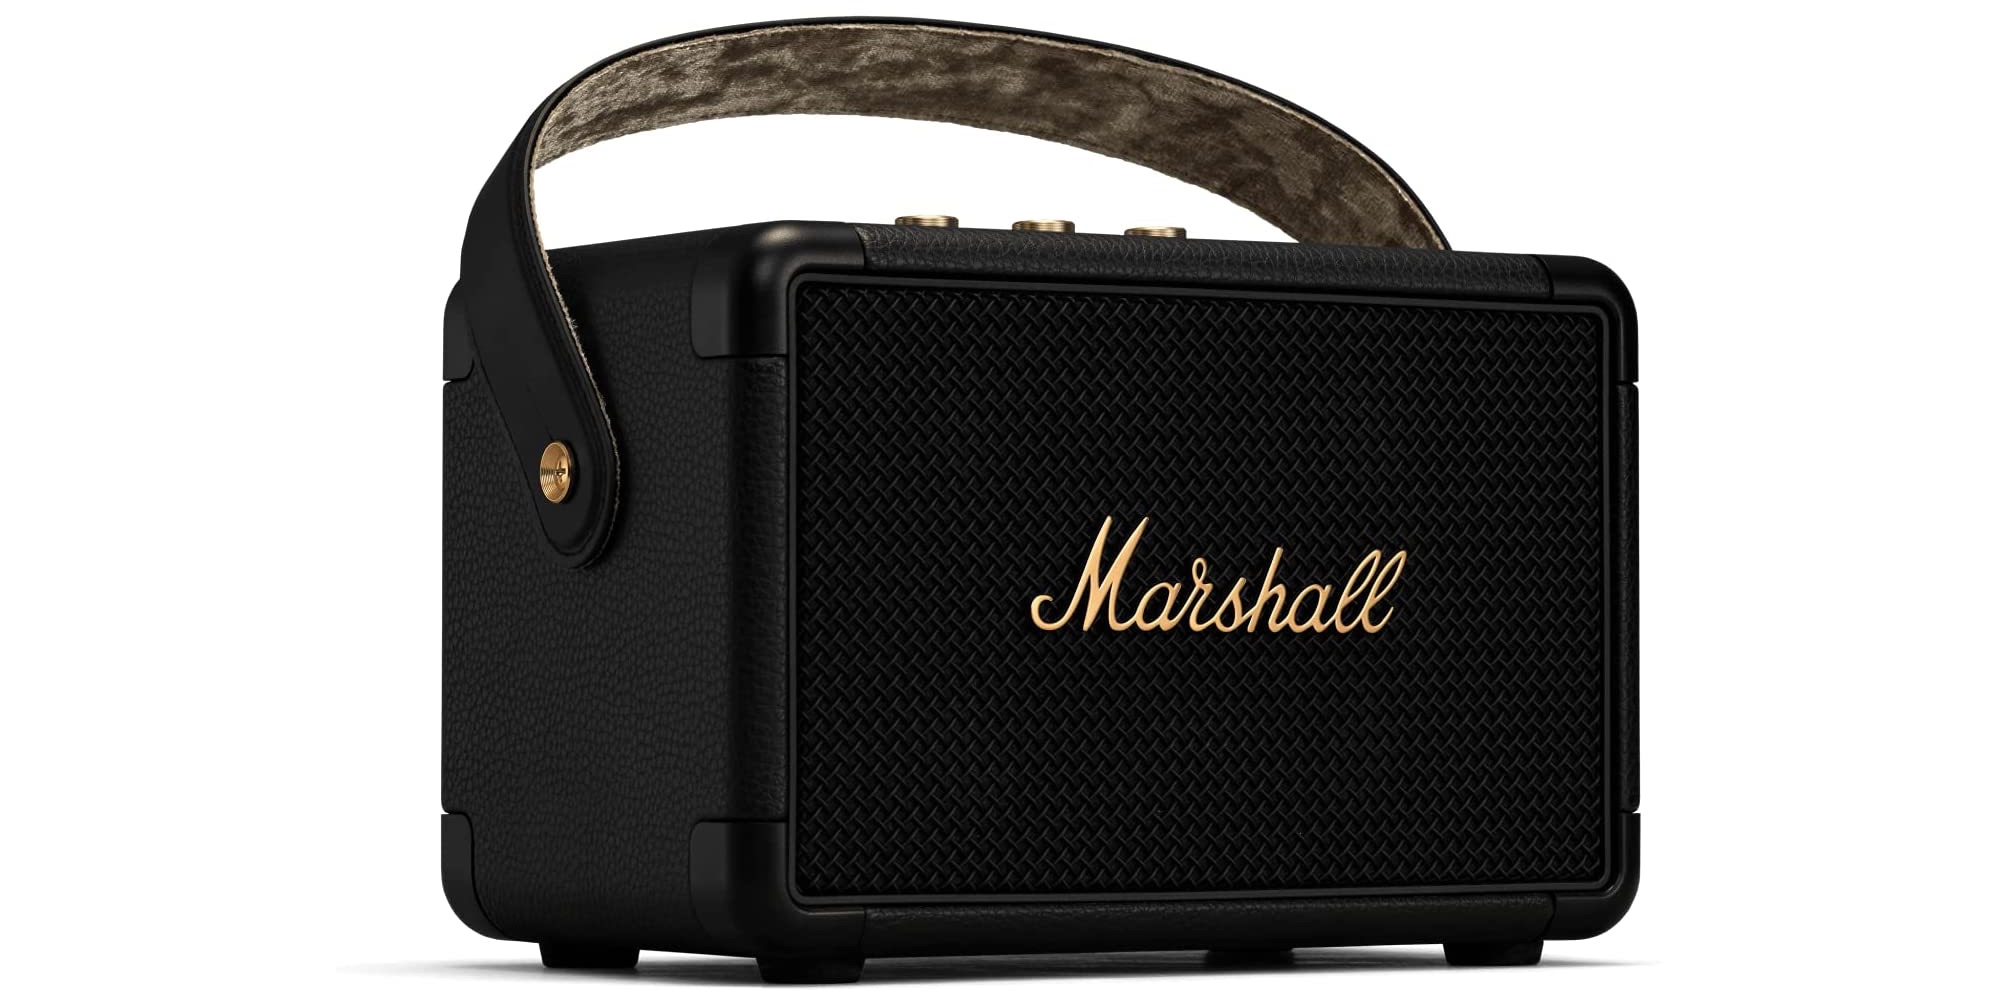 Marshall\'s popular vinyl-wrapped portable Bluetooth from on $130 sale speakers